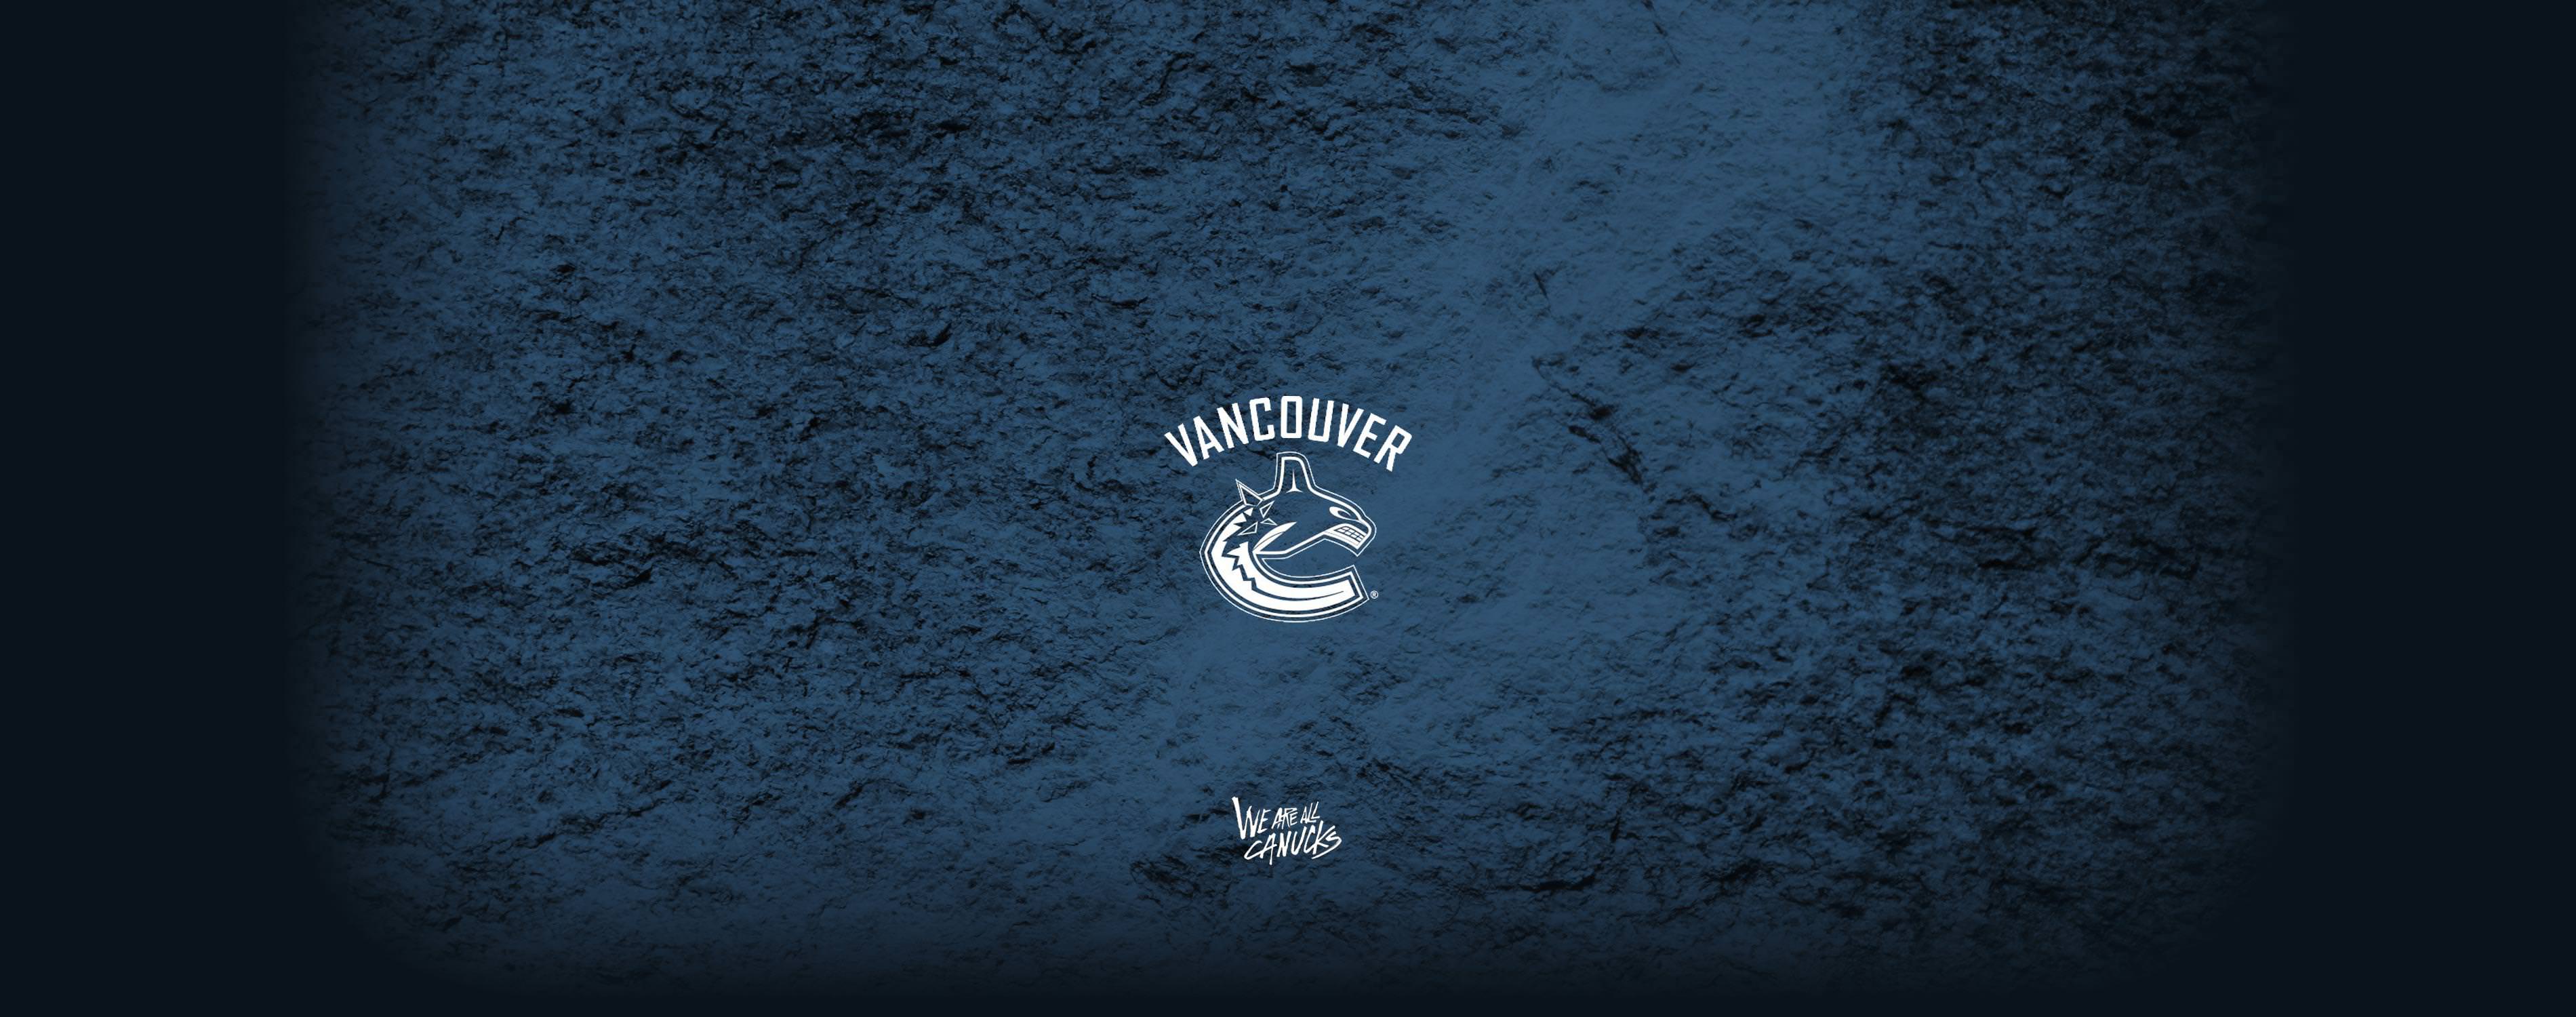 A Simple Canucks Wallpaper I Made In The Theme Of Current We